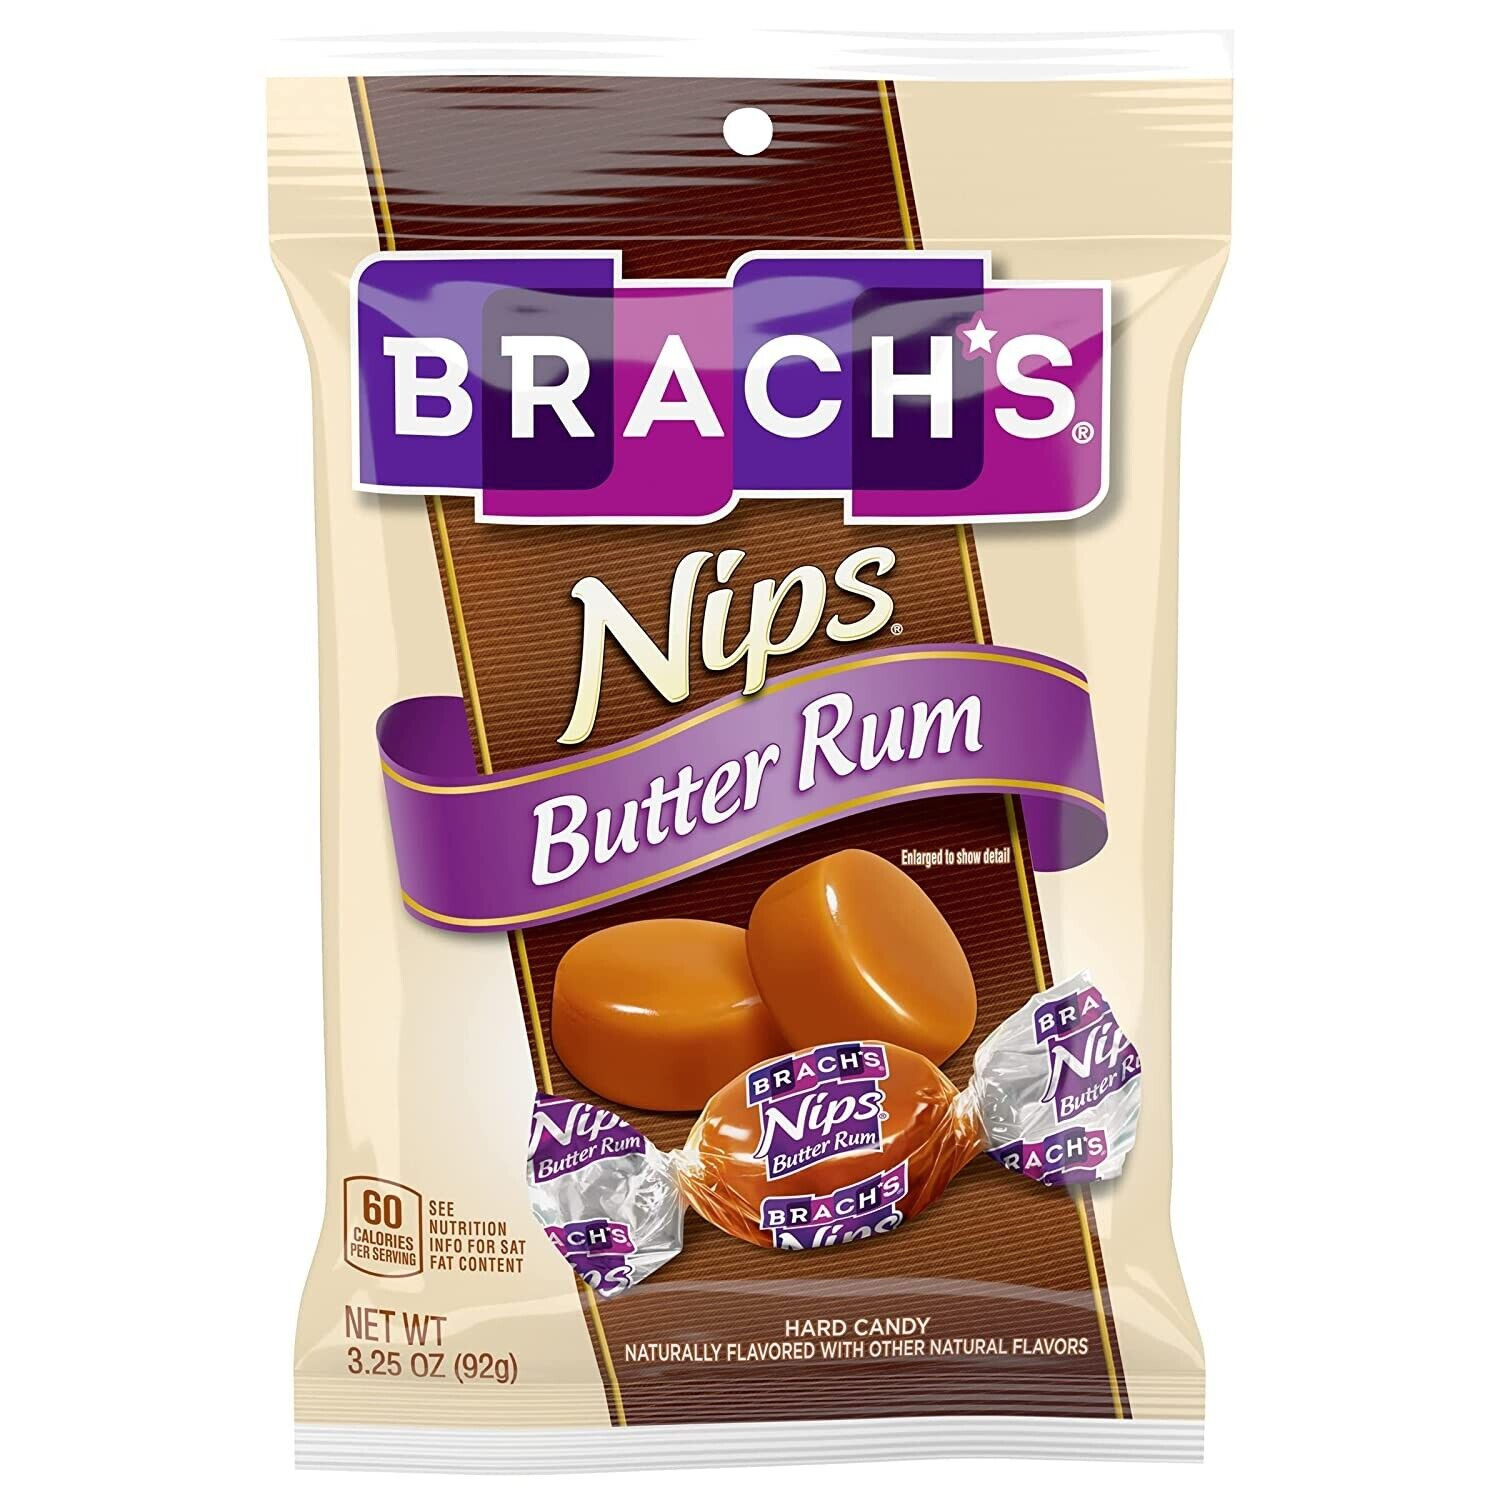 Brach's - There's no wrong answer!